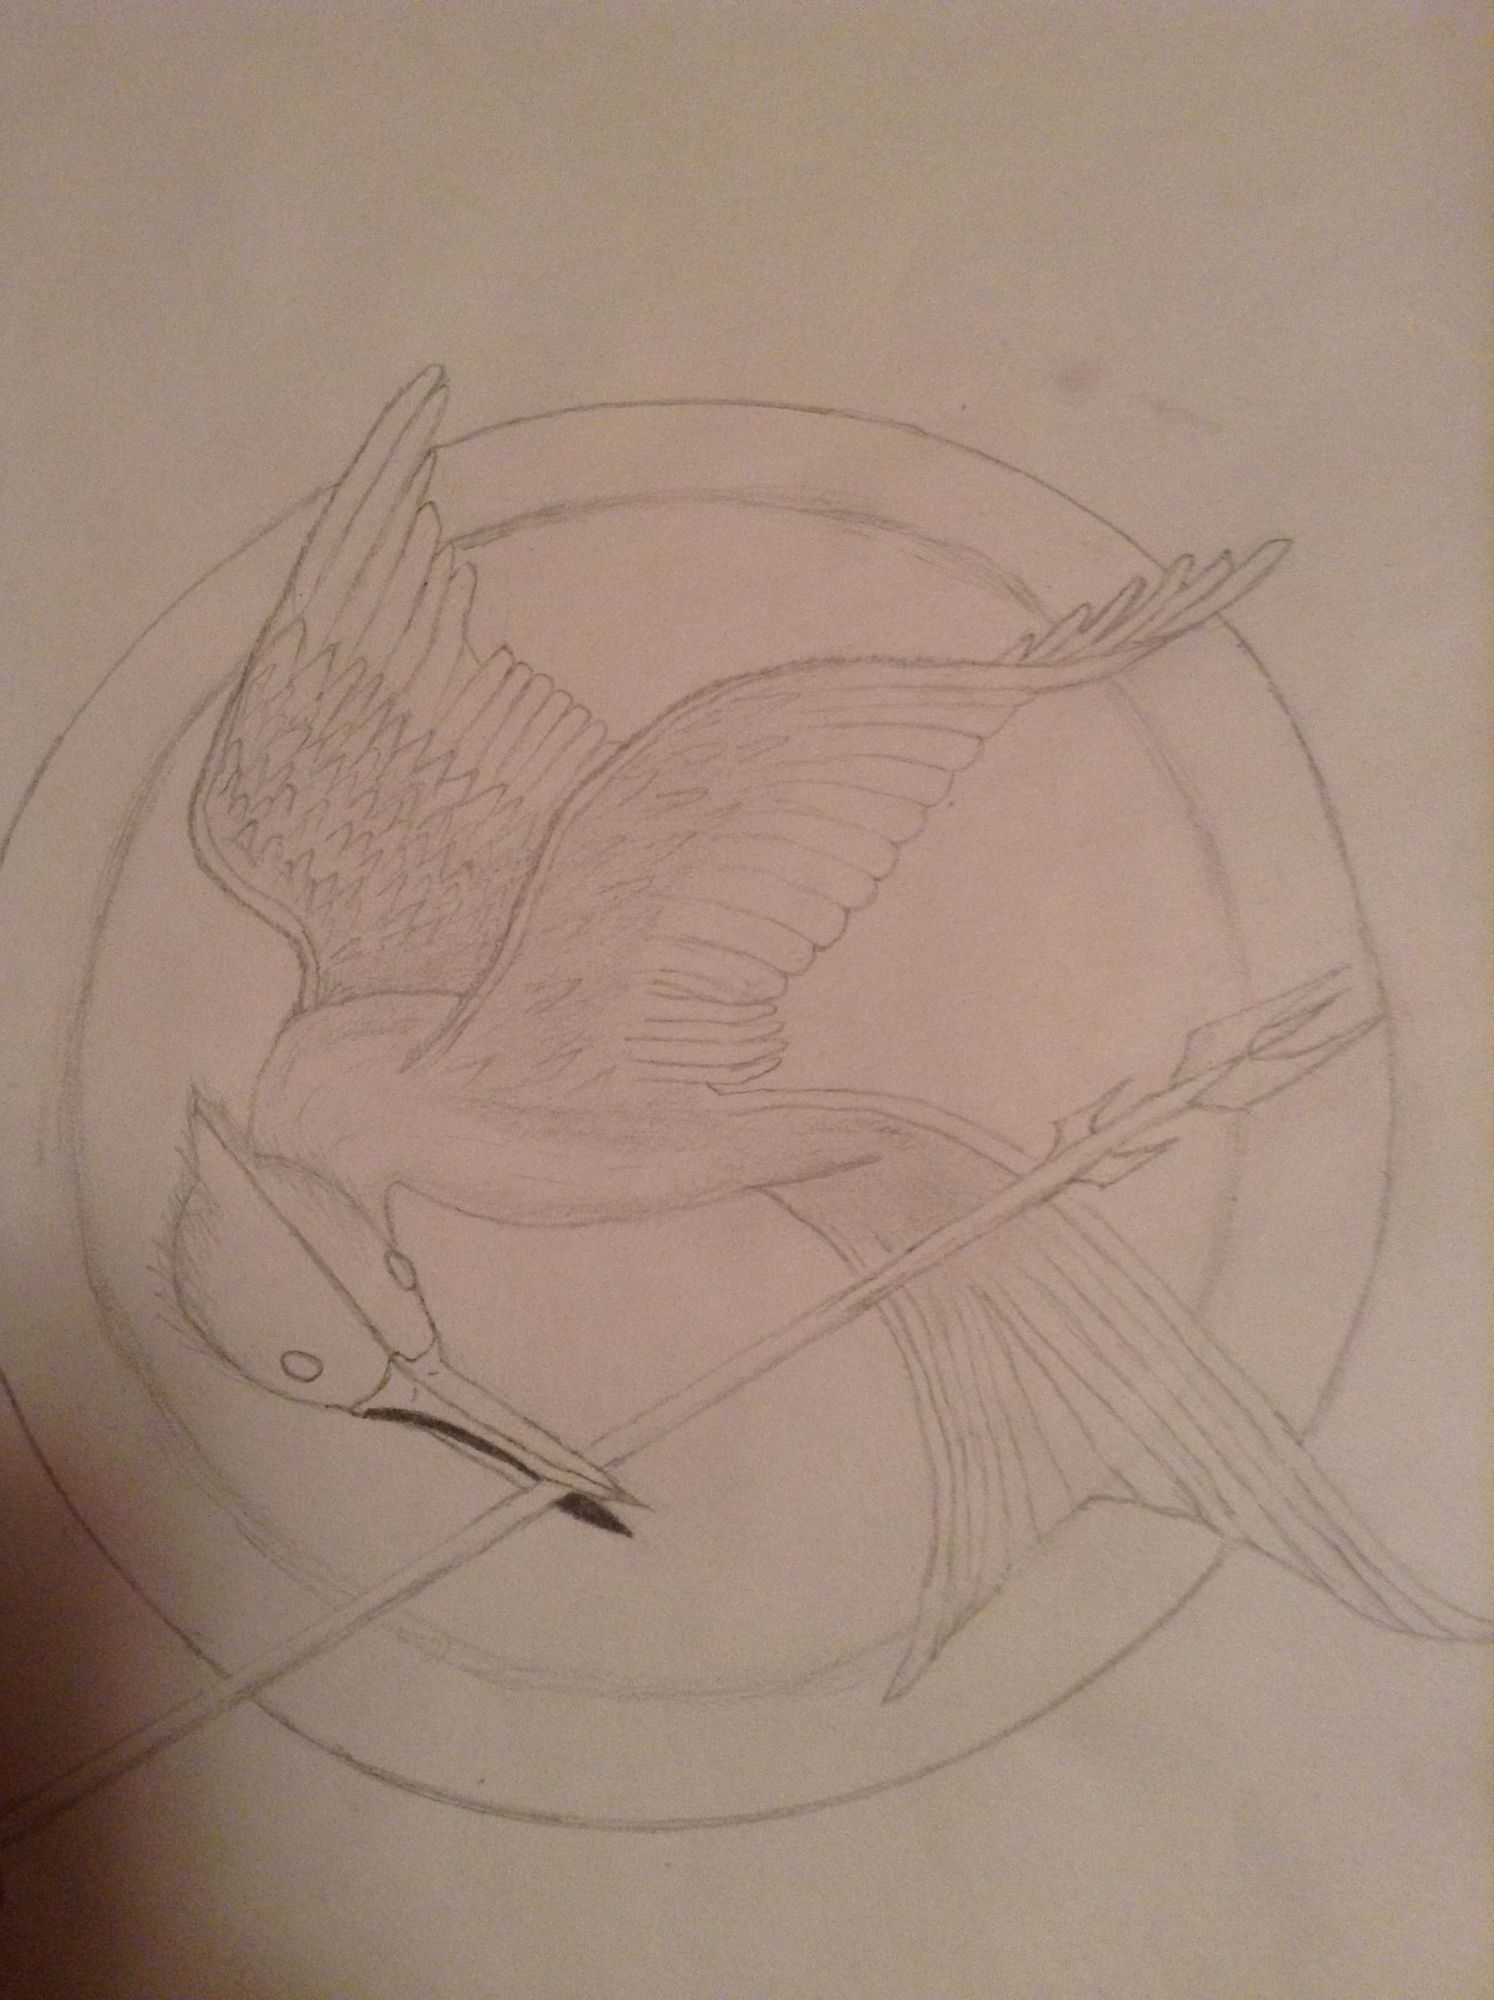 A Mockingjay from The Hunger Games